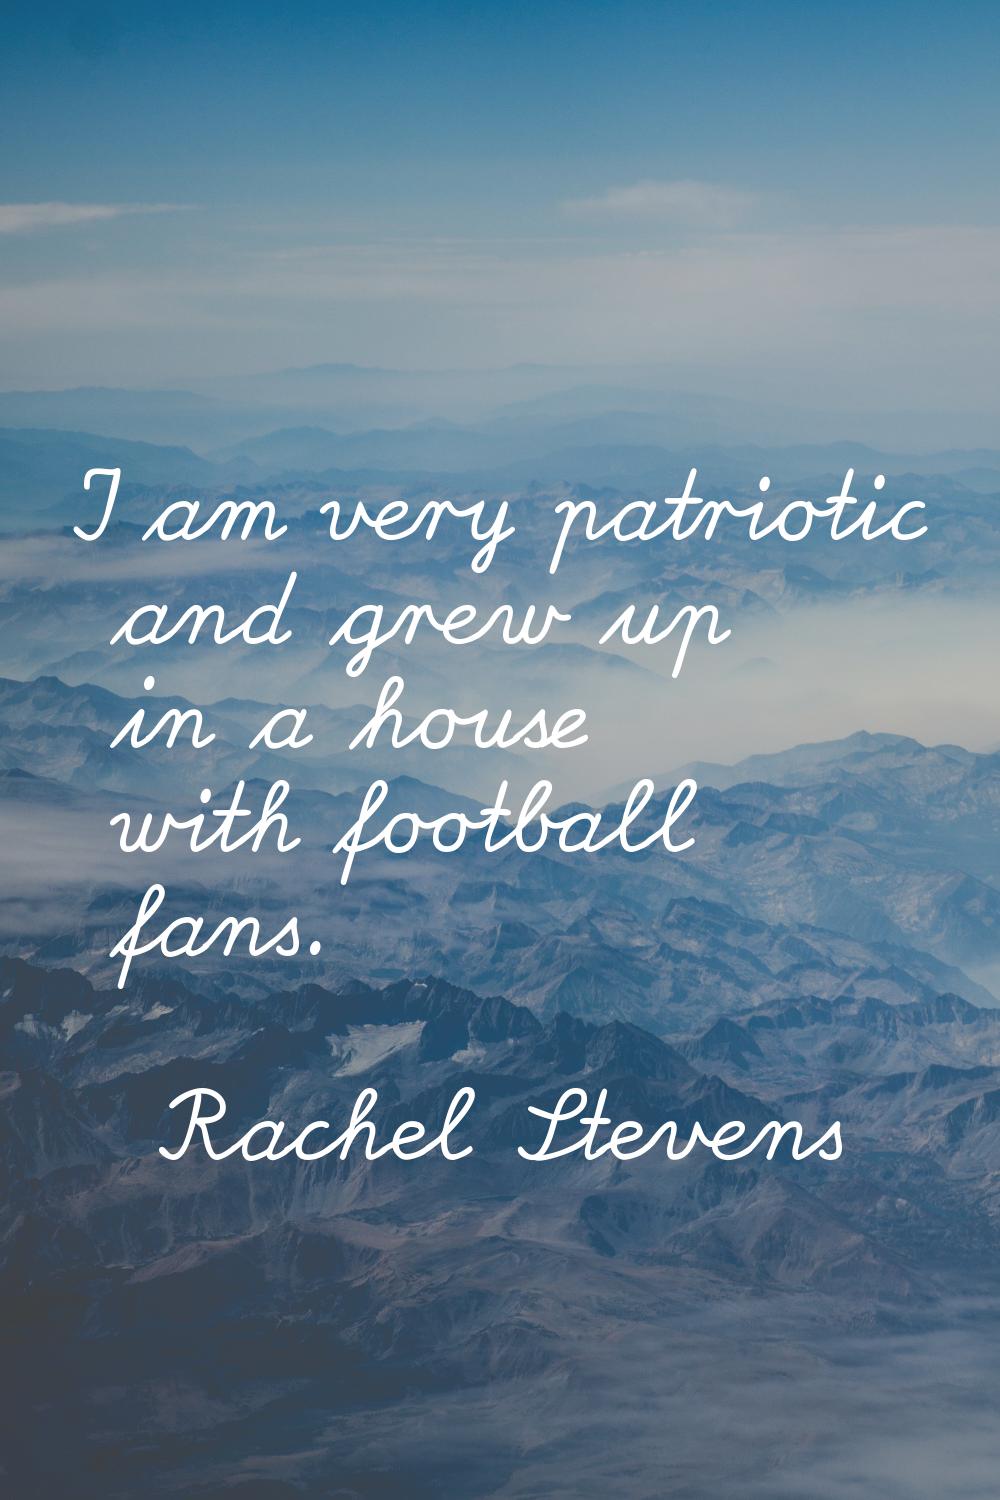 I am very patriotic and grew up in a house with football fans.